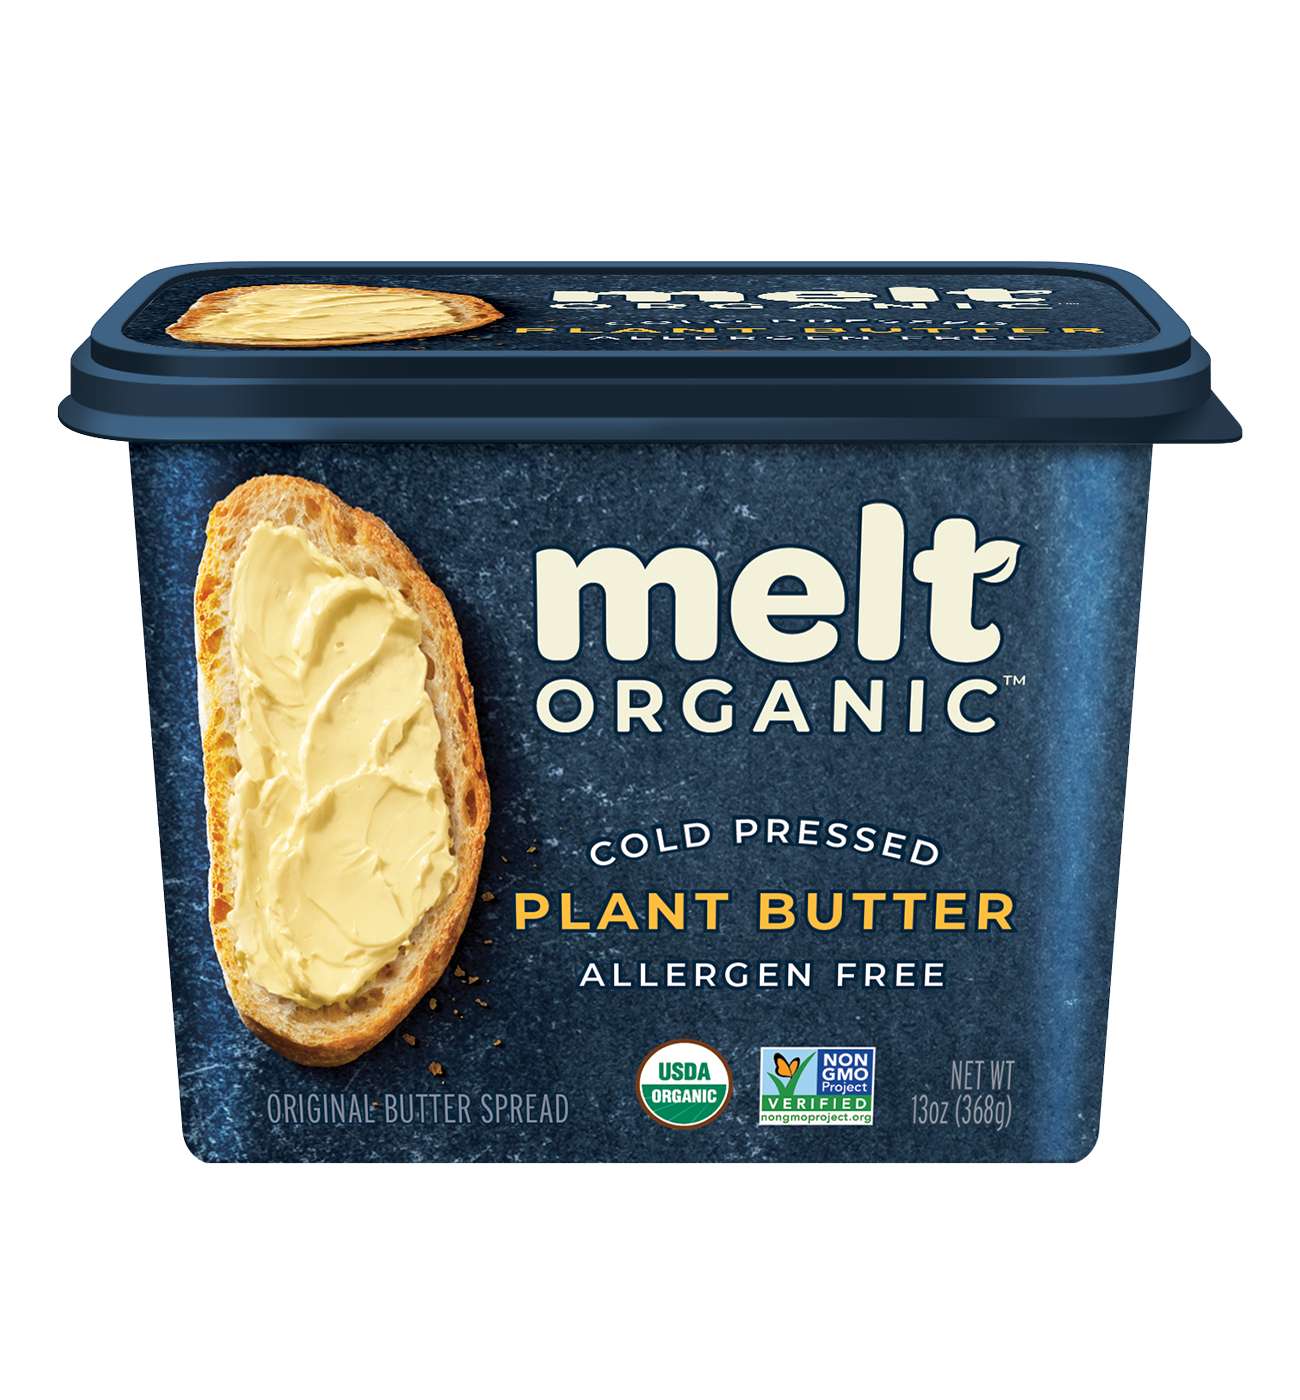 Melt Organic Butter Spread; image 1 of 4